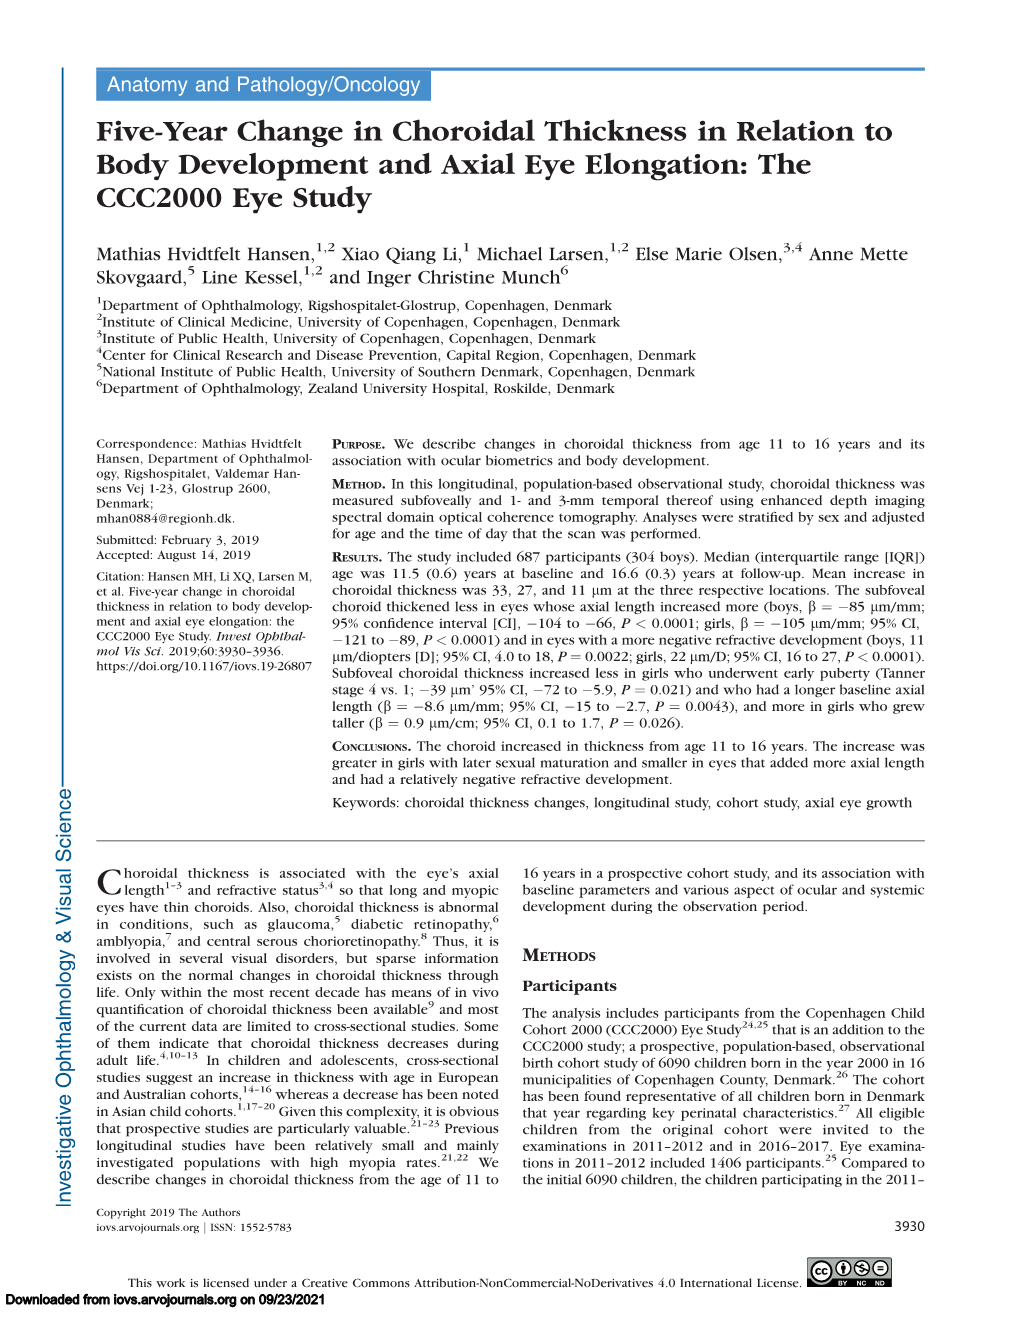 Five-Year Change in Choroidal Thickness in Relation to Body Development and Axial Eye Elongation: the CCC2000 Eye Study